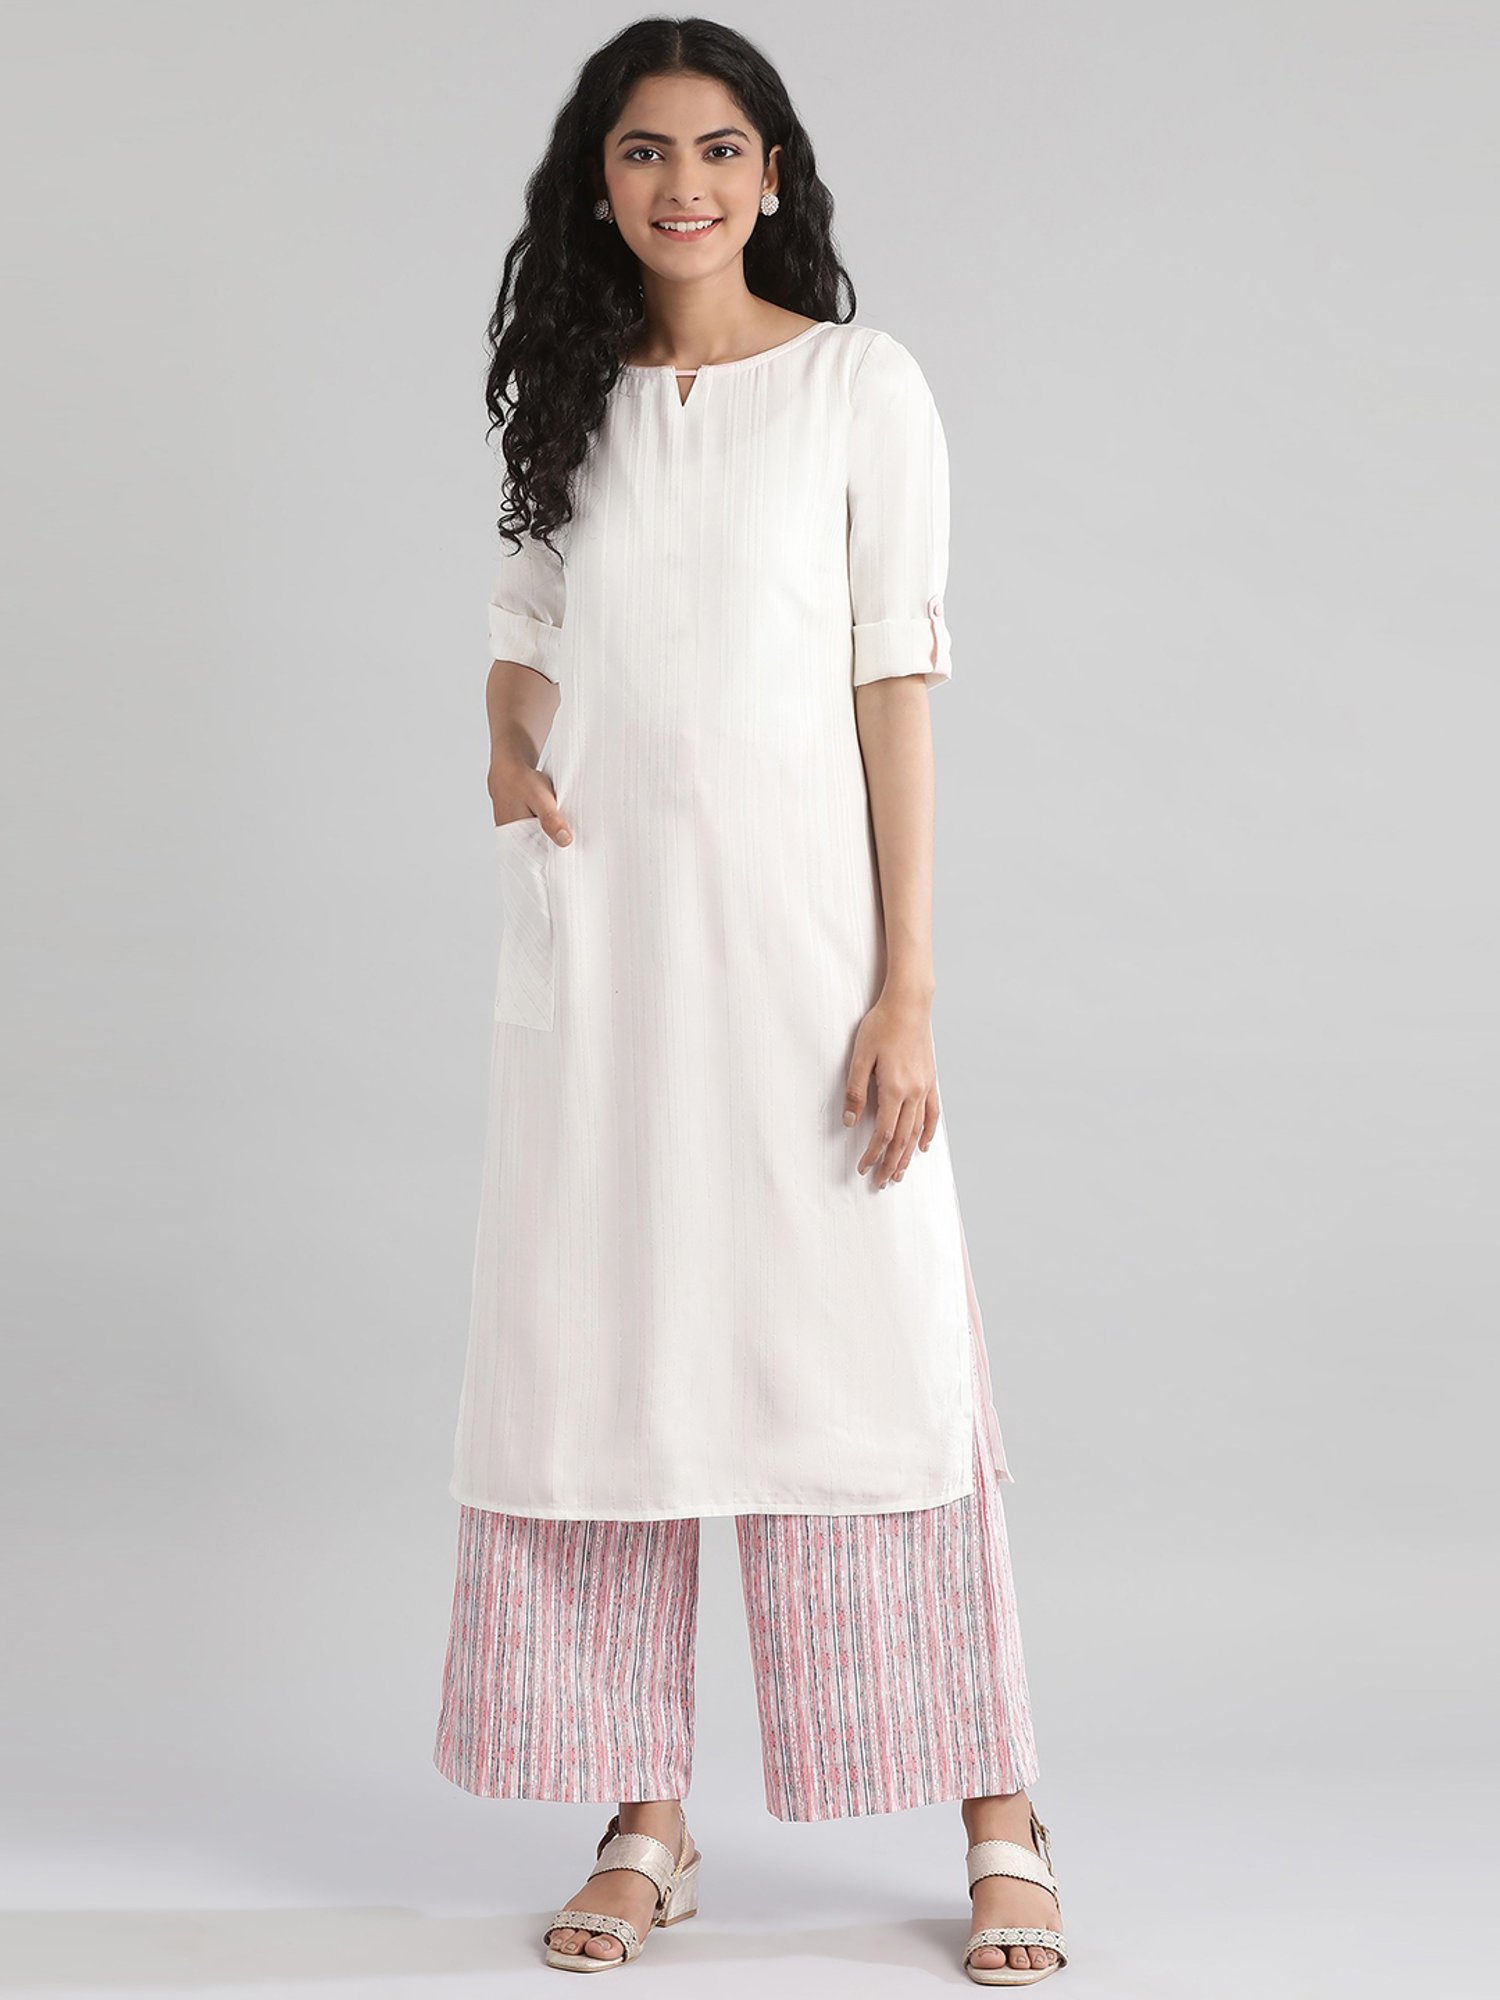 Aurelia - Here's how @pinkpeppercorn_sonal is gearing up for Republic Day  with ethnic flair and a dash of chic! What will be your R-day look? Tell us  below! White Anarkali Kurta, Tights